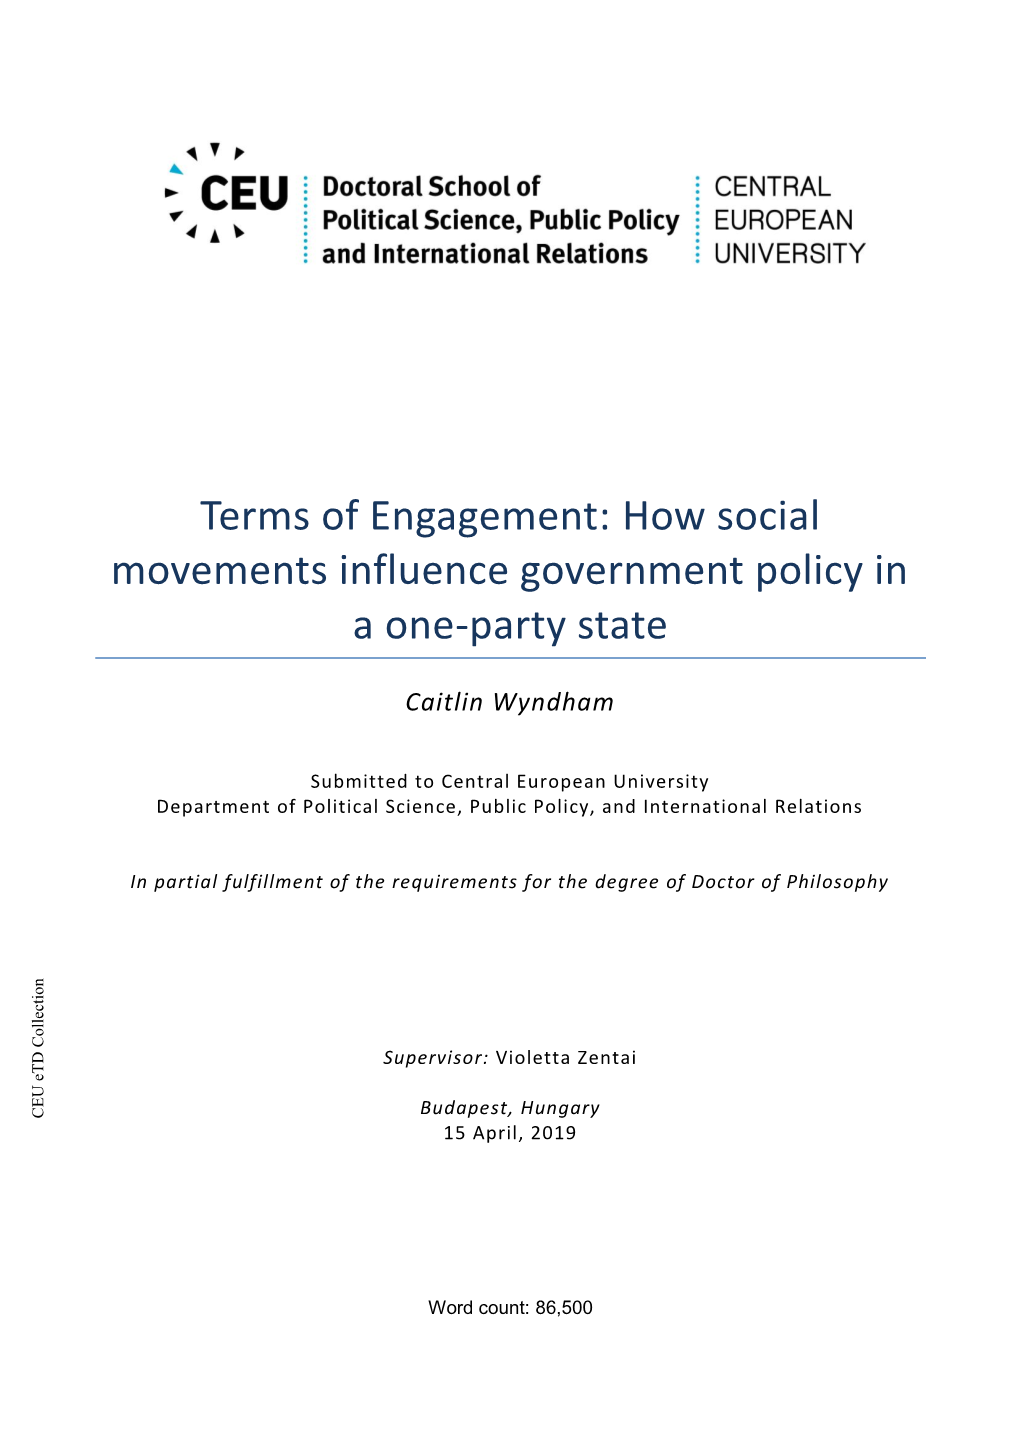 How Social Movements Influence Government Policy in a One-Party State